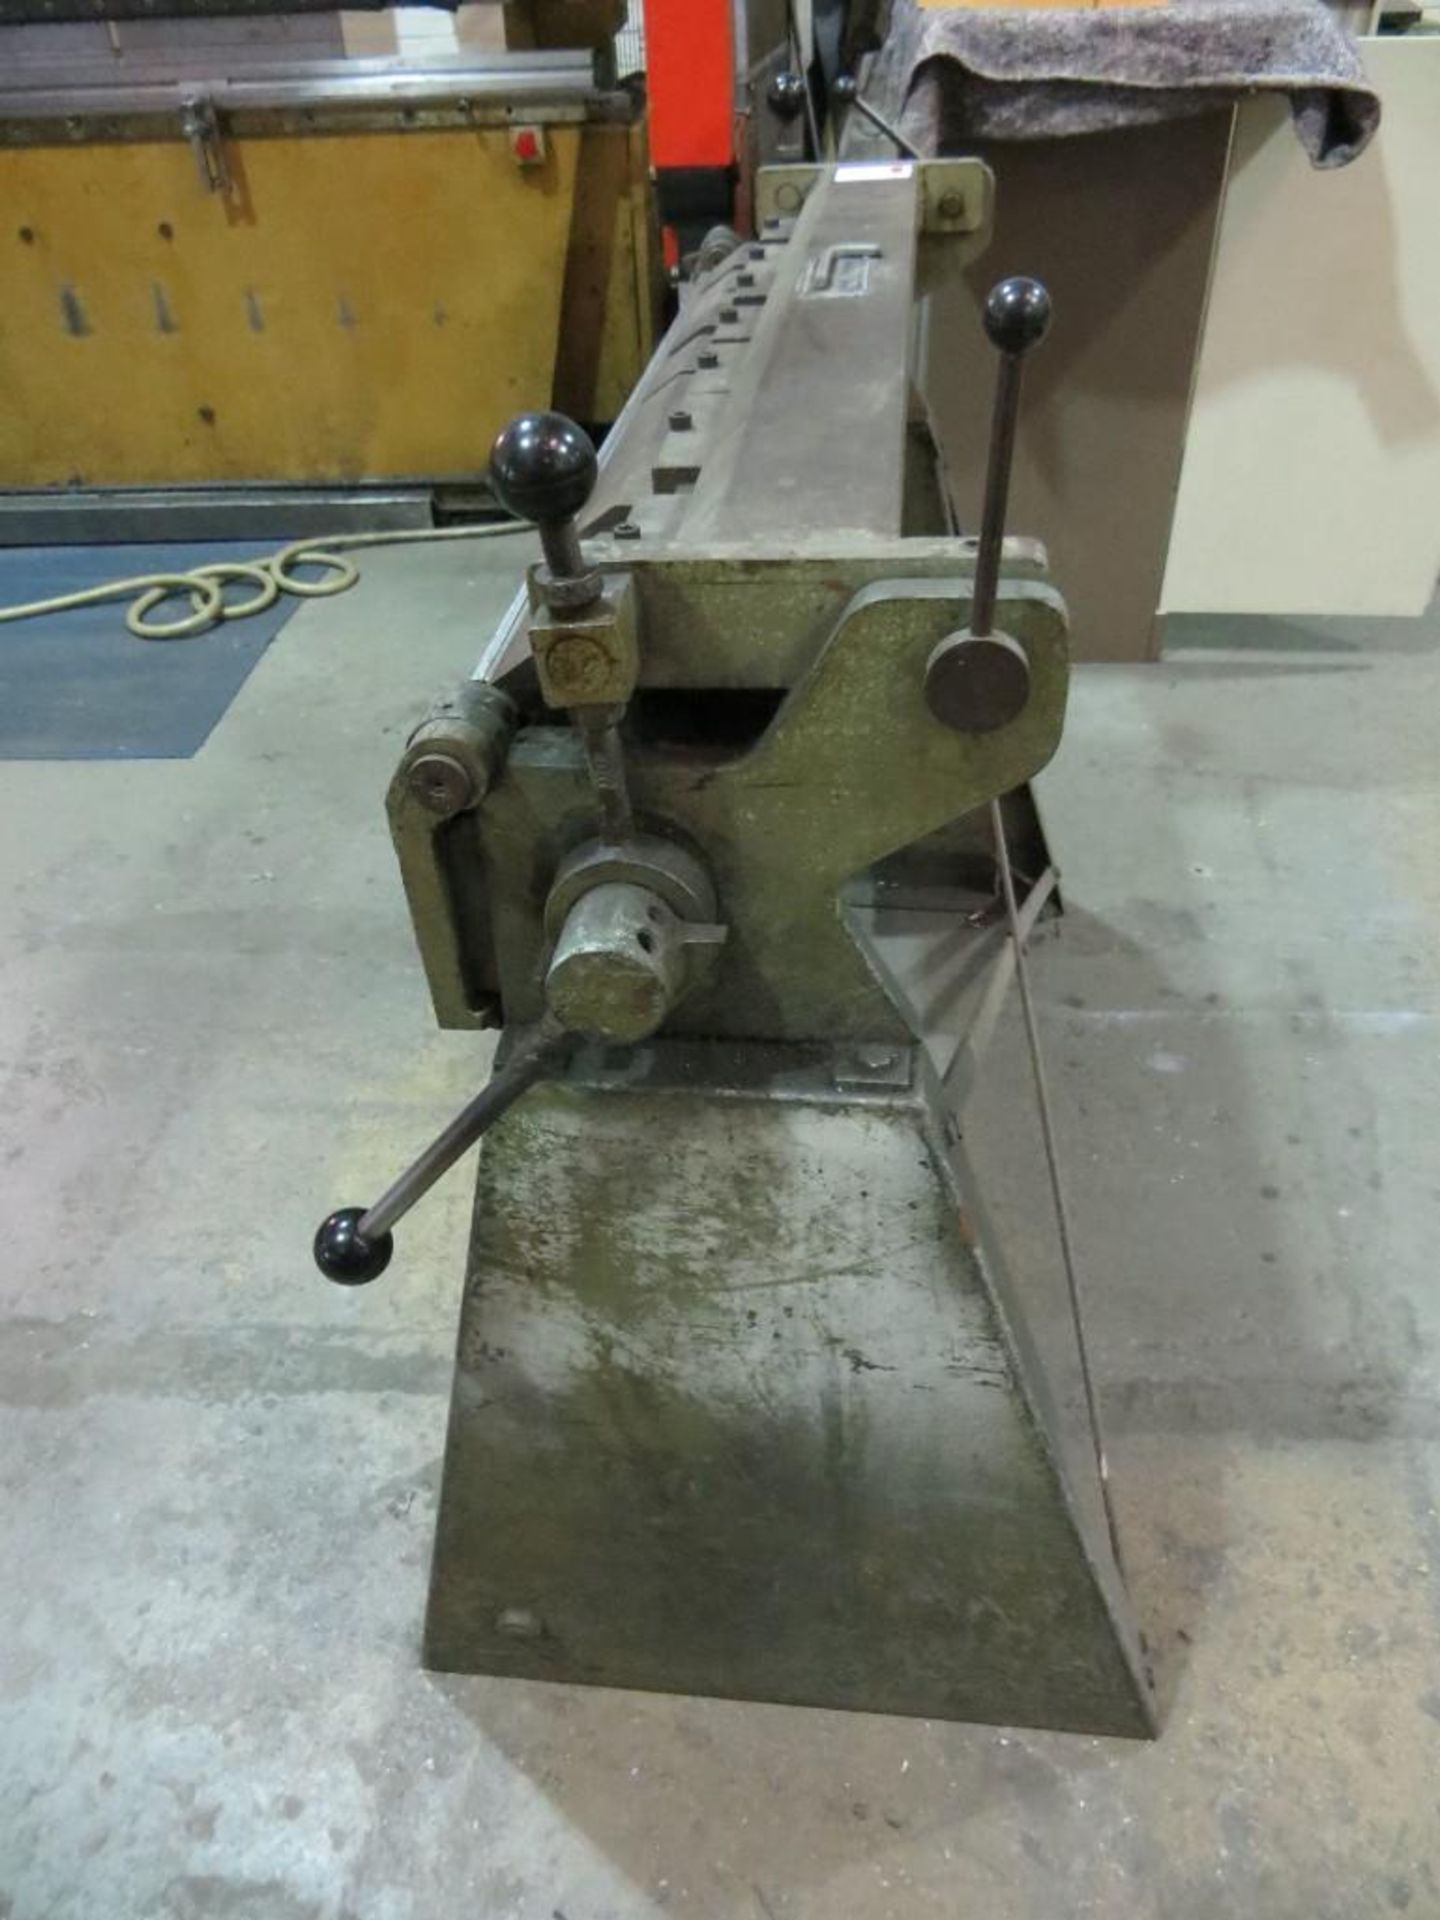 Oliver manual bending 1.5mm thickness 900mm wide - Image 3 of 6